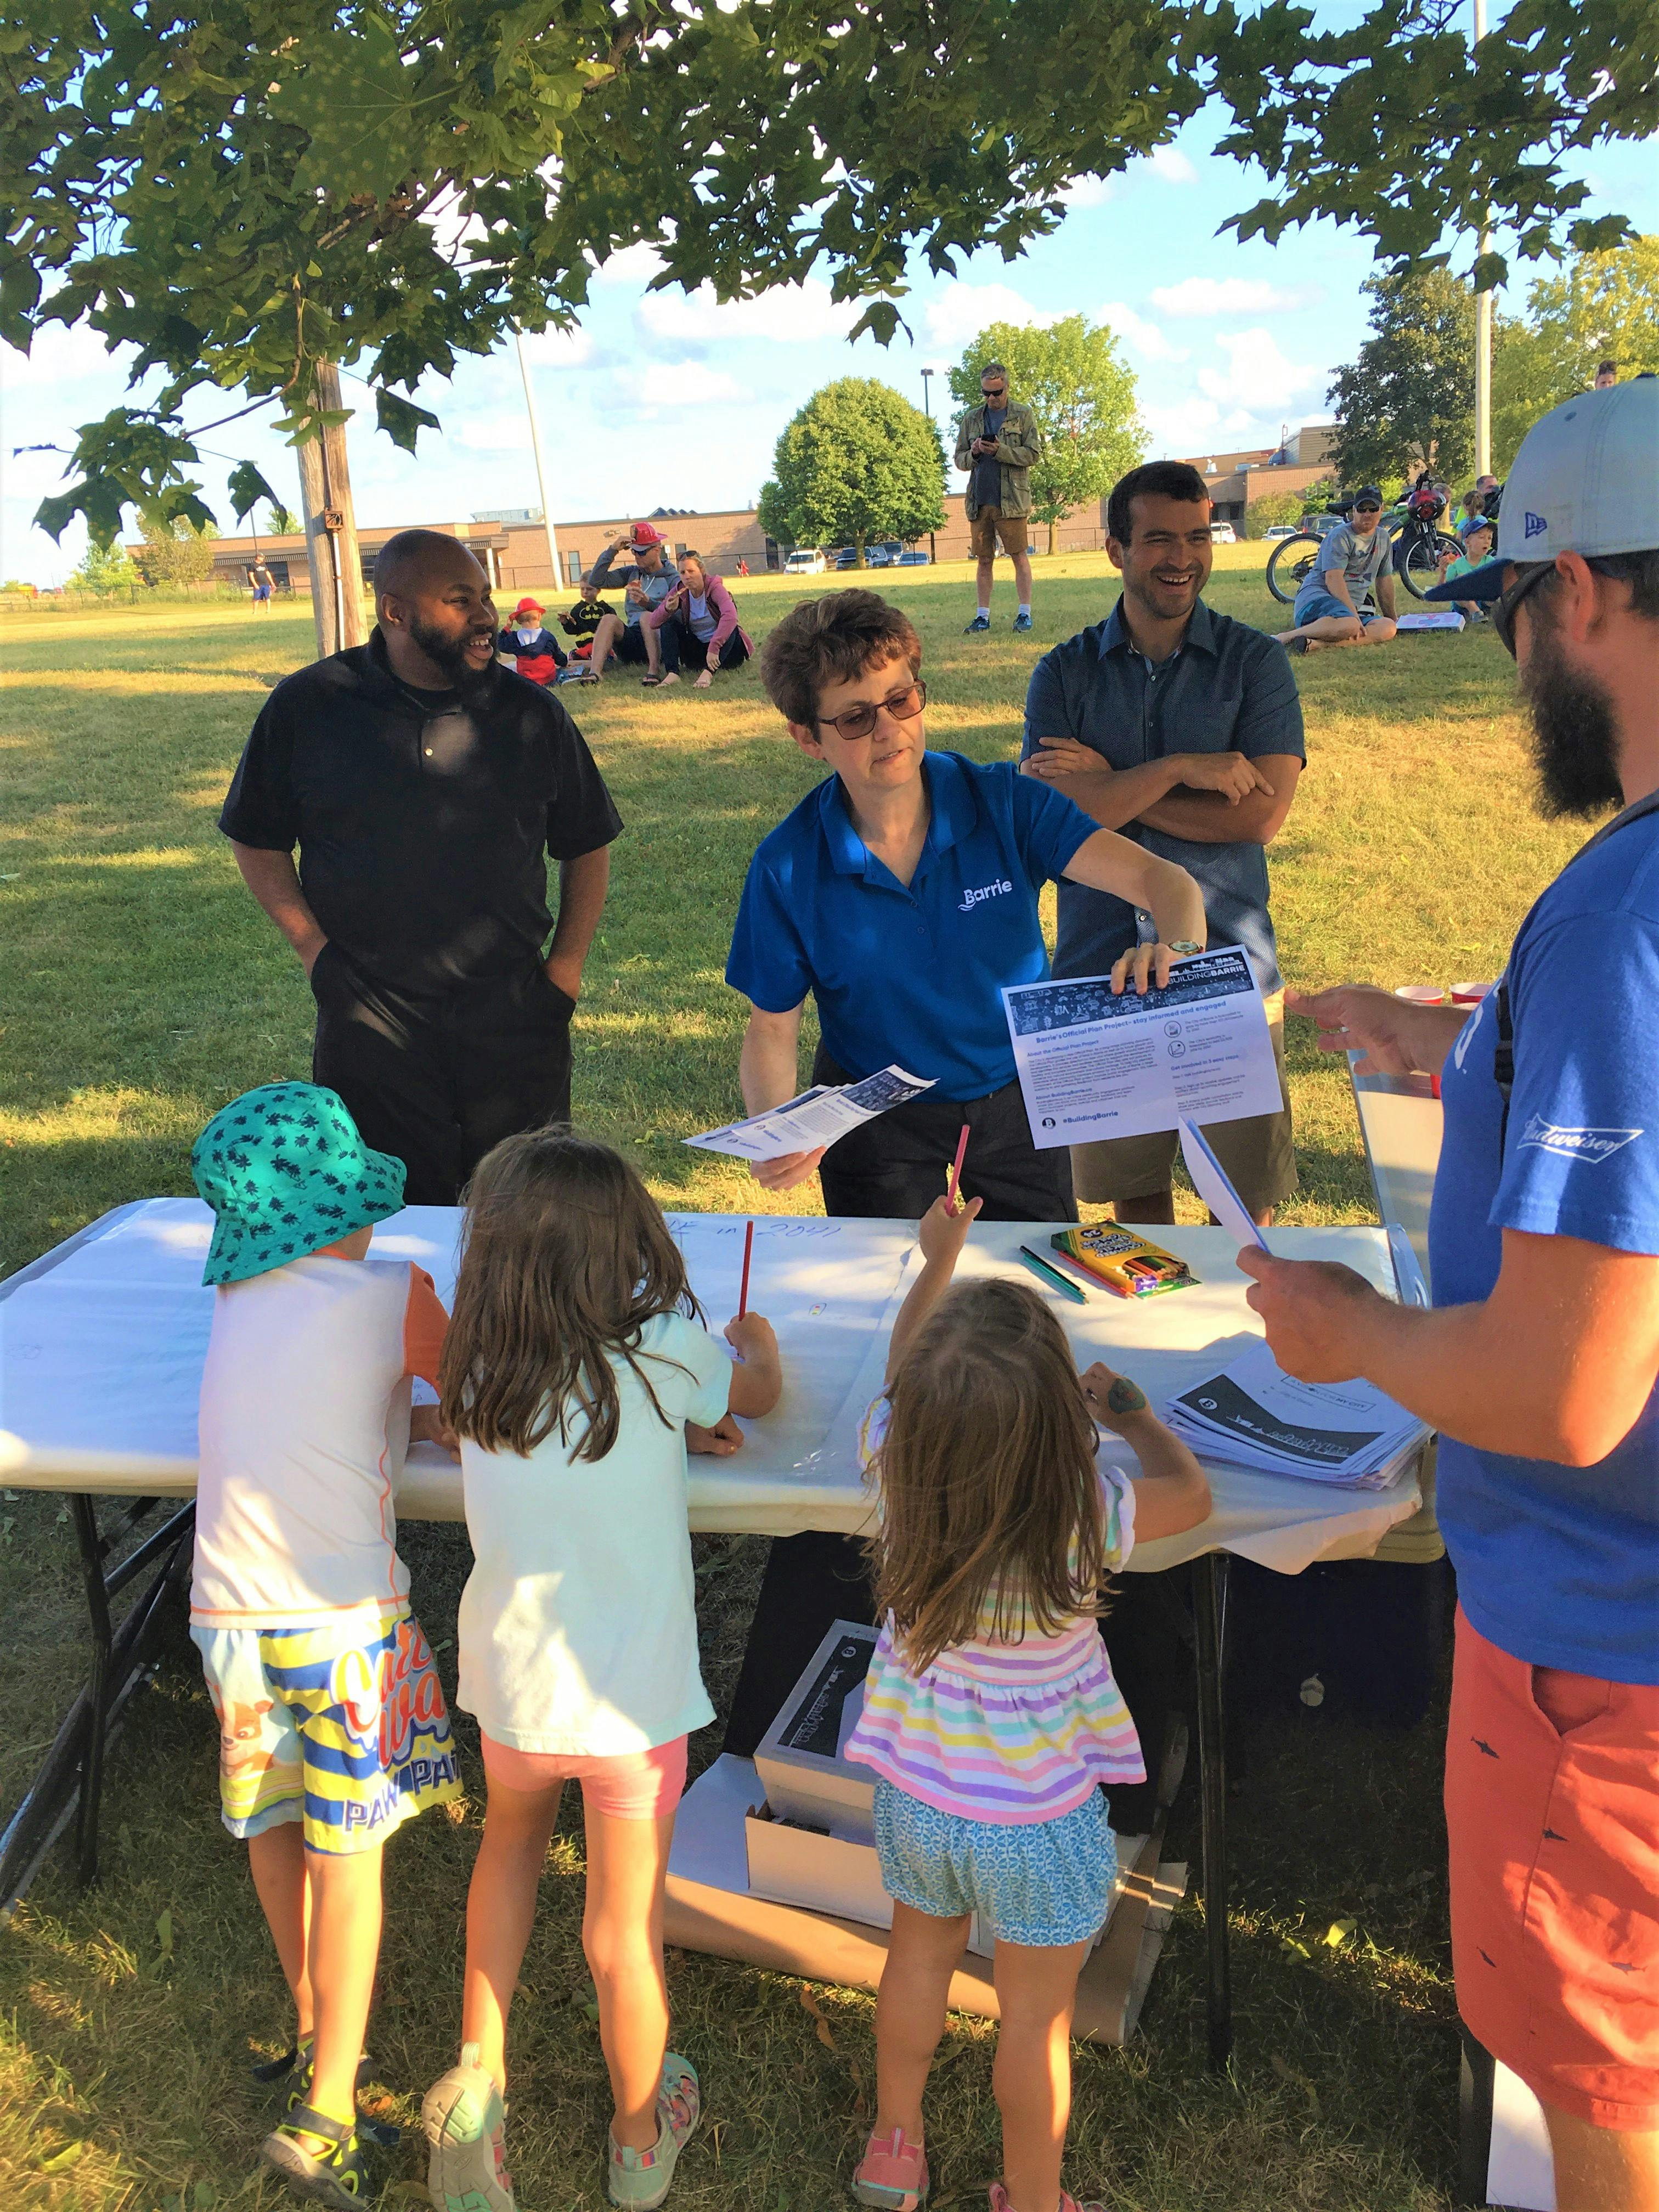 Engaging with community members at Barrie Fire and Emergency Service's Hot Summer Nights event